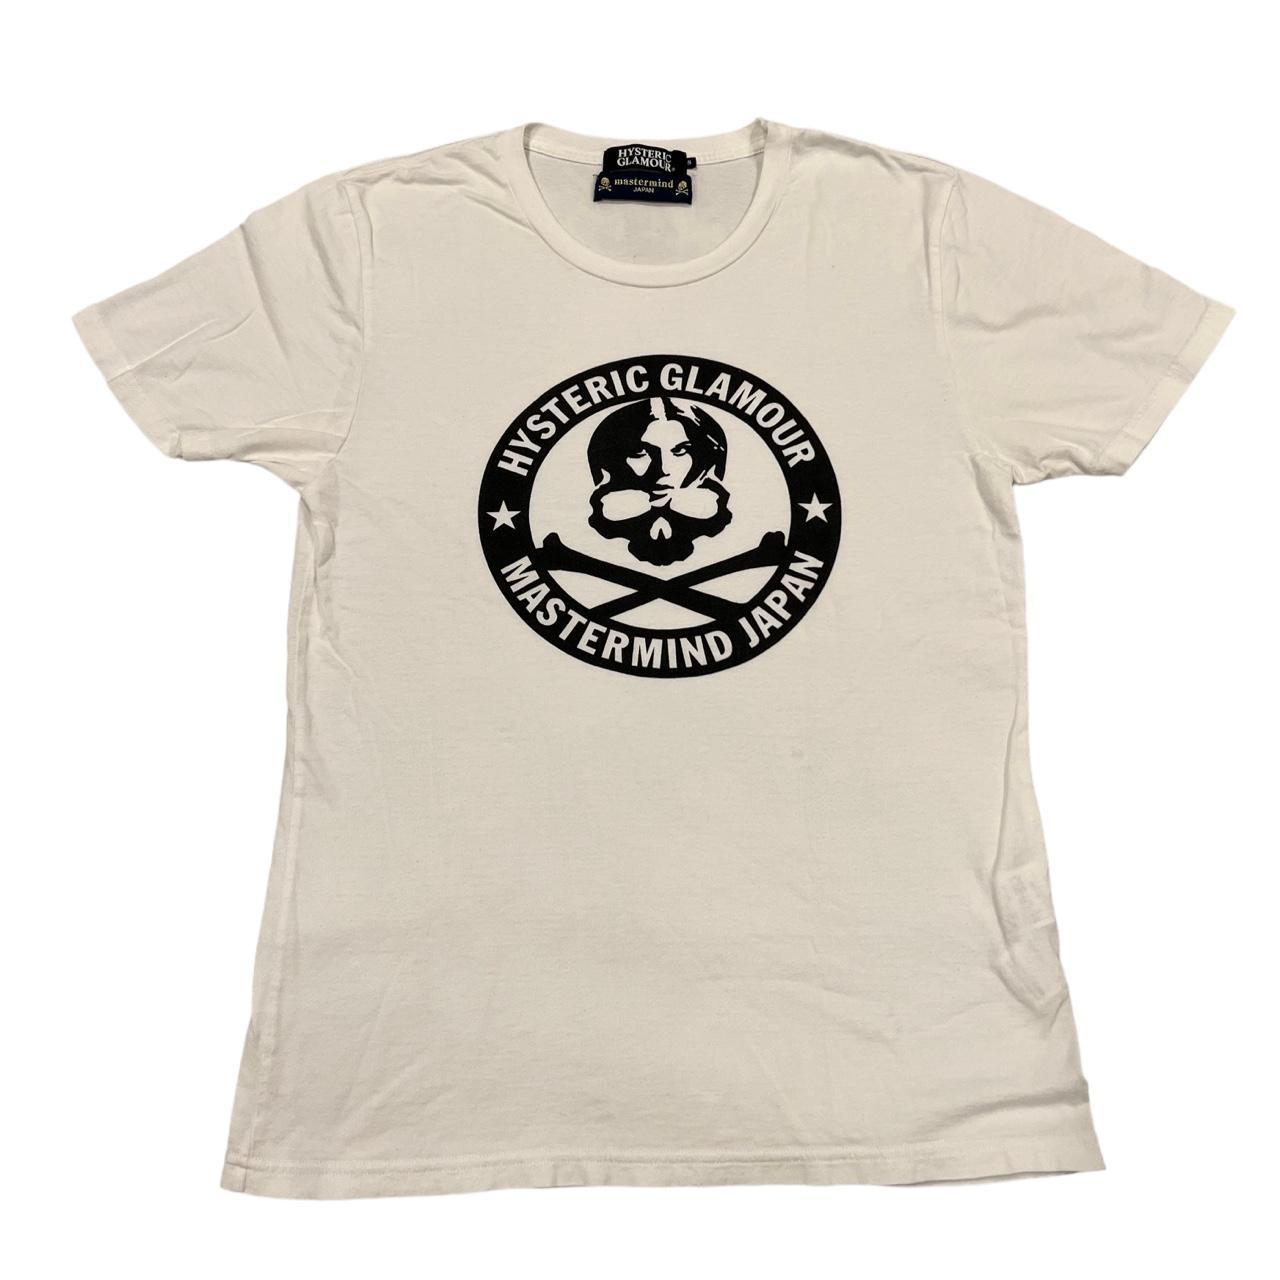 Hysteric Glamour x Mastermind Japan White T-Shirt